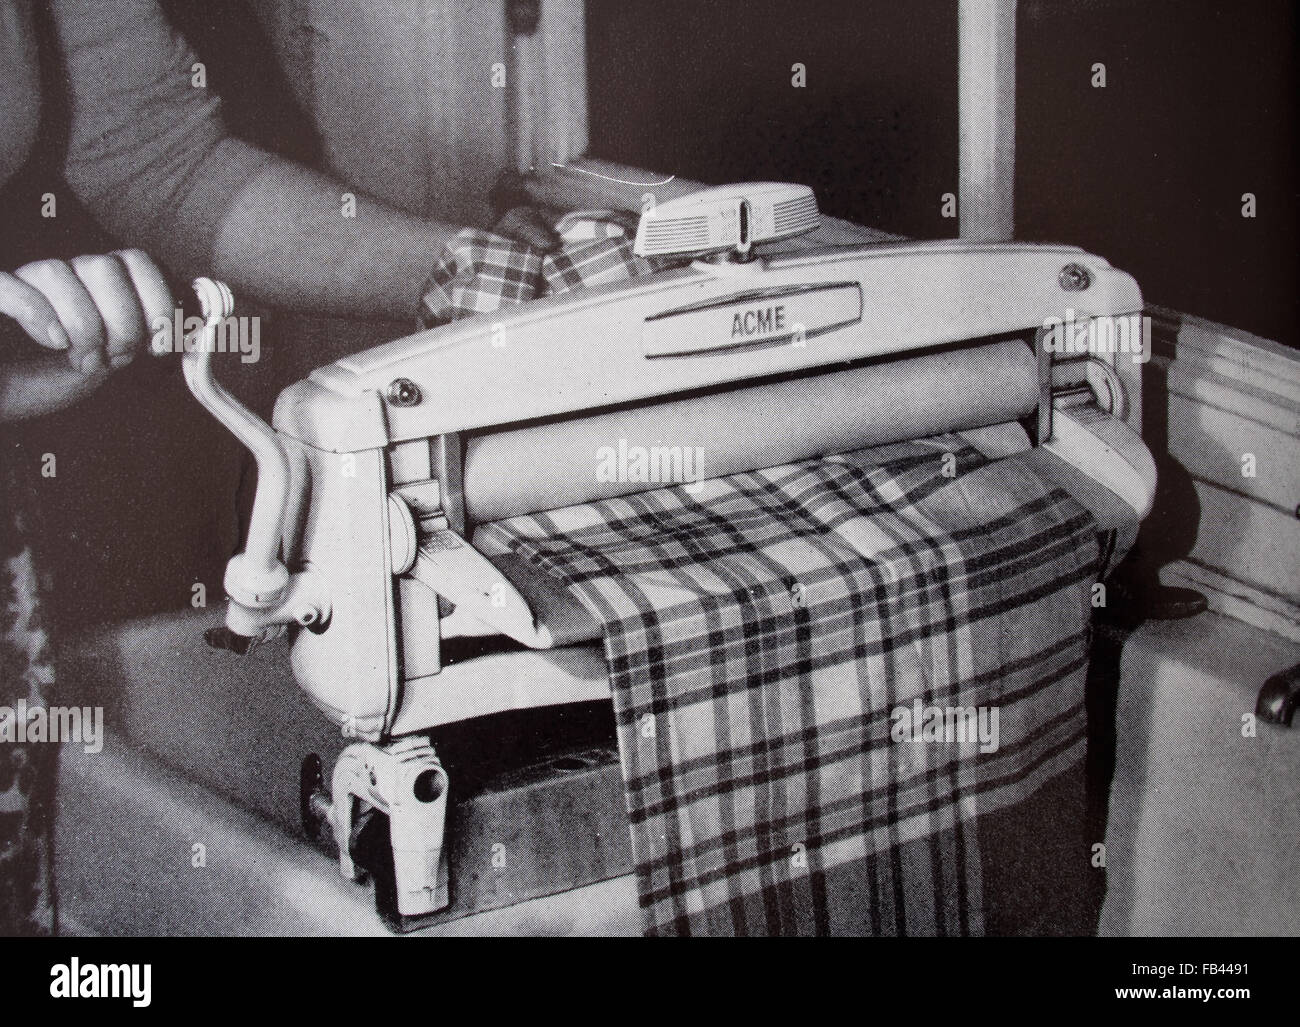 ACME wringer in use, 1957 domestic life. Print from The Book of Good Housekeeping. Stock Photo